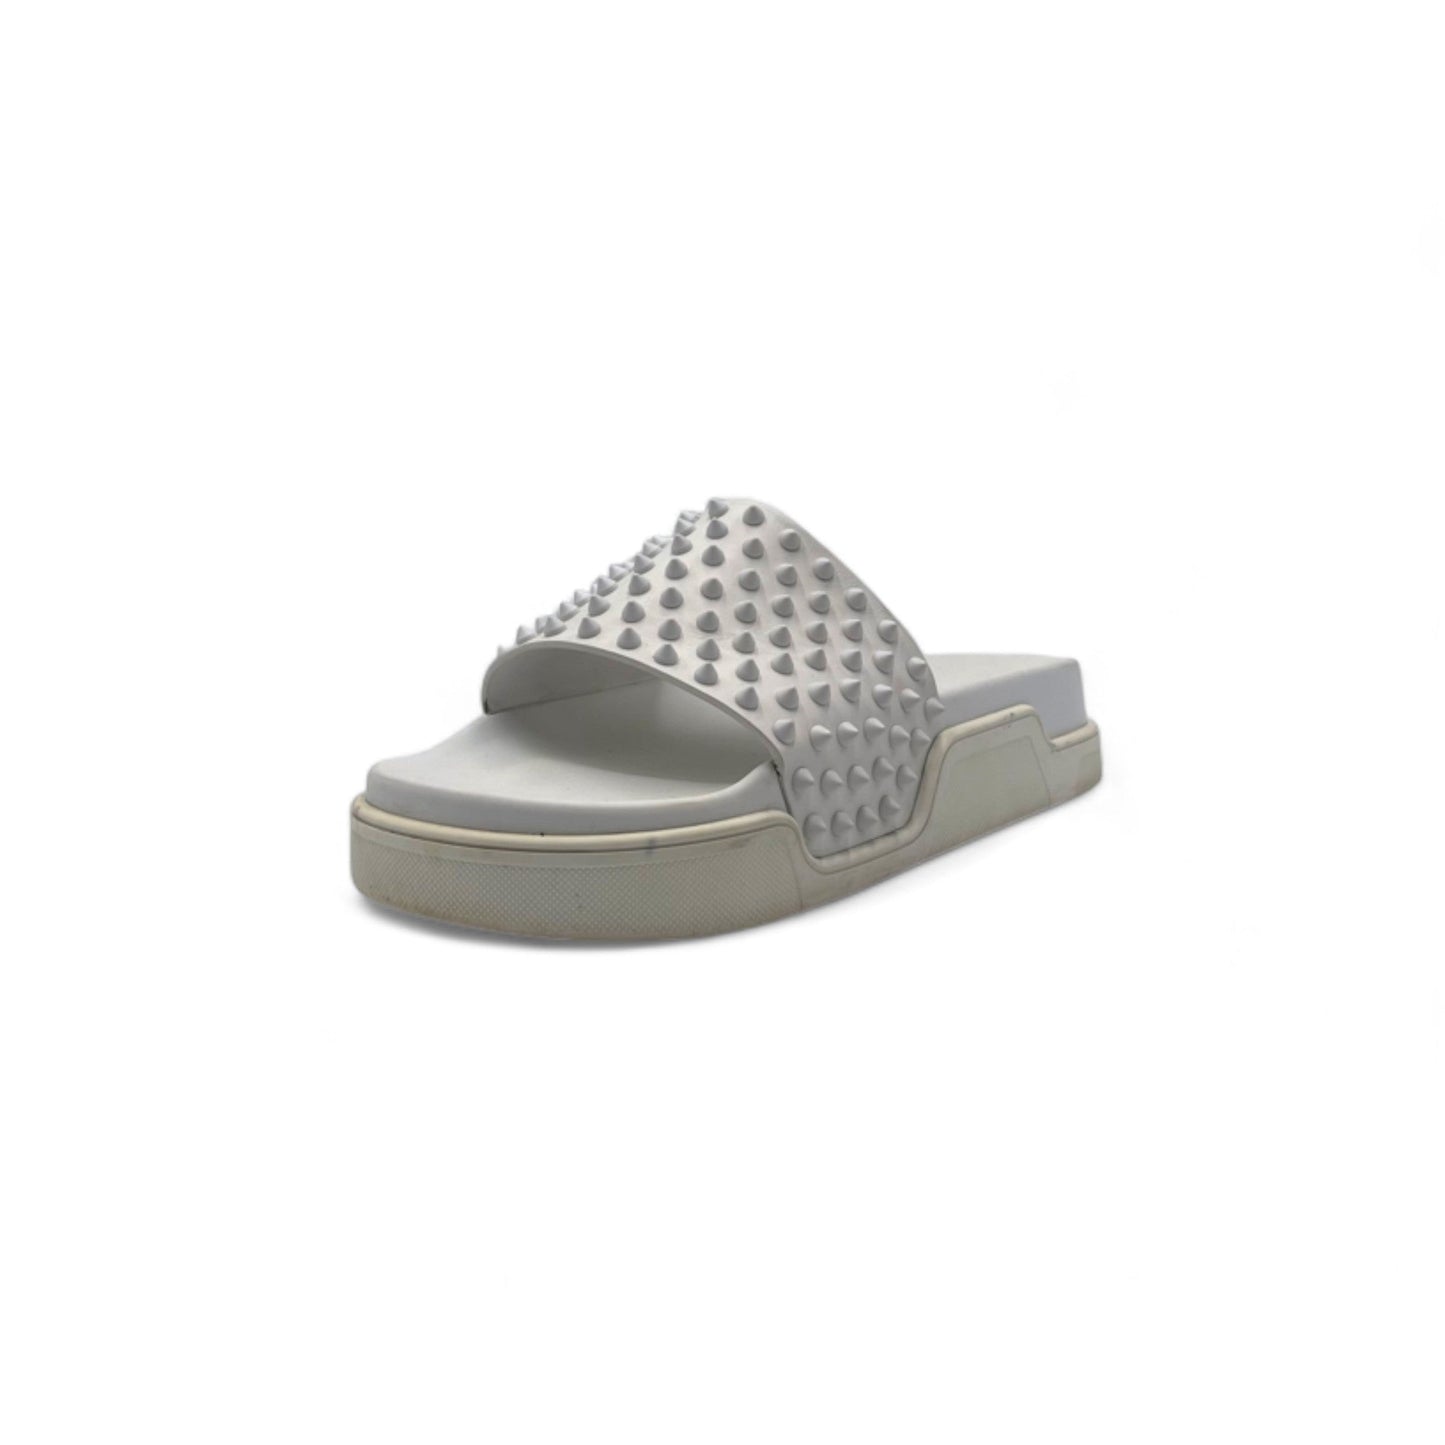 Christian Louboutin Spike Accents Rubber Slides